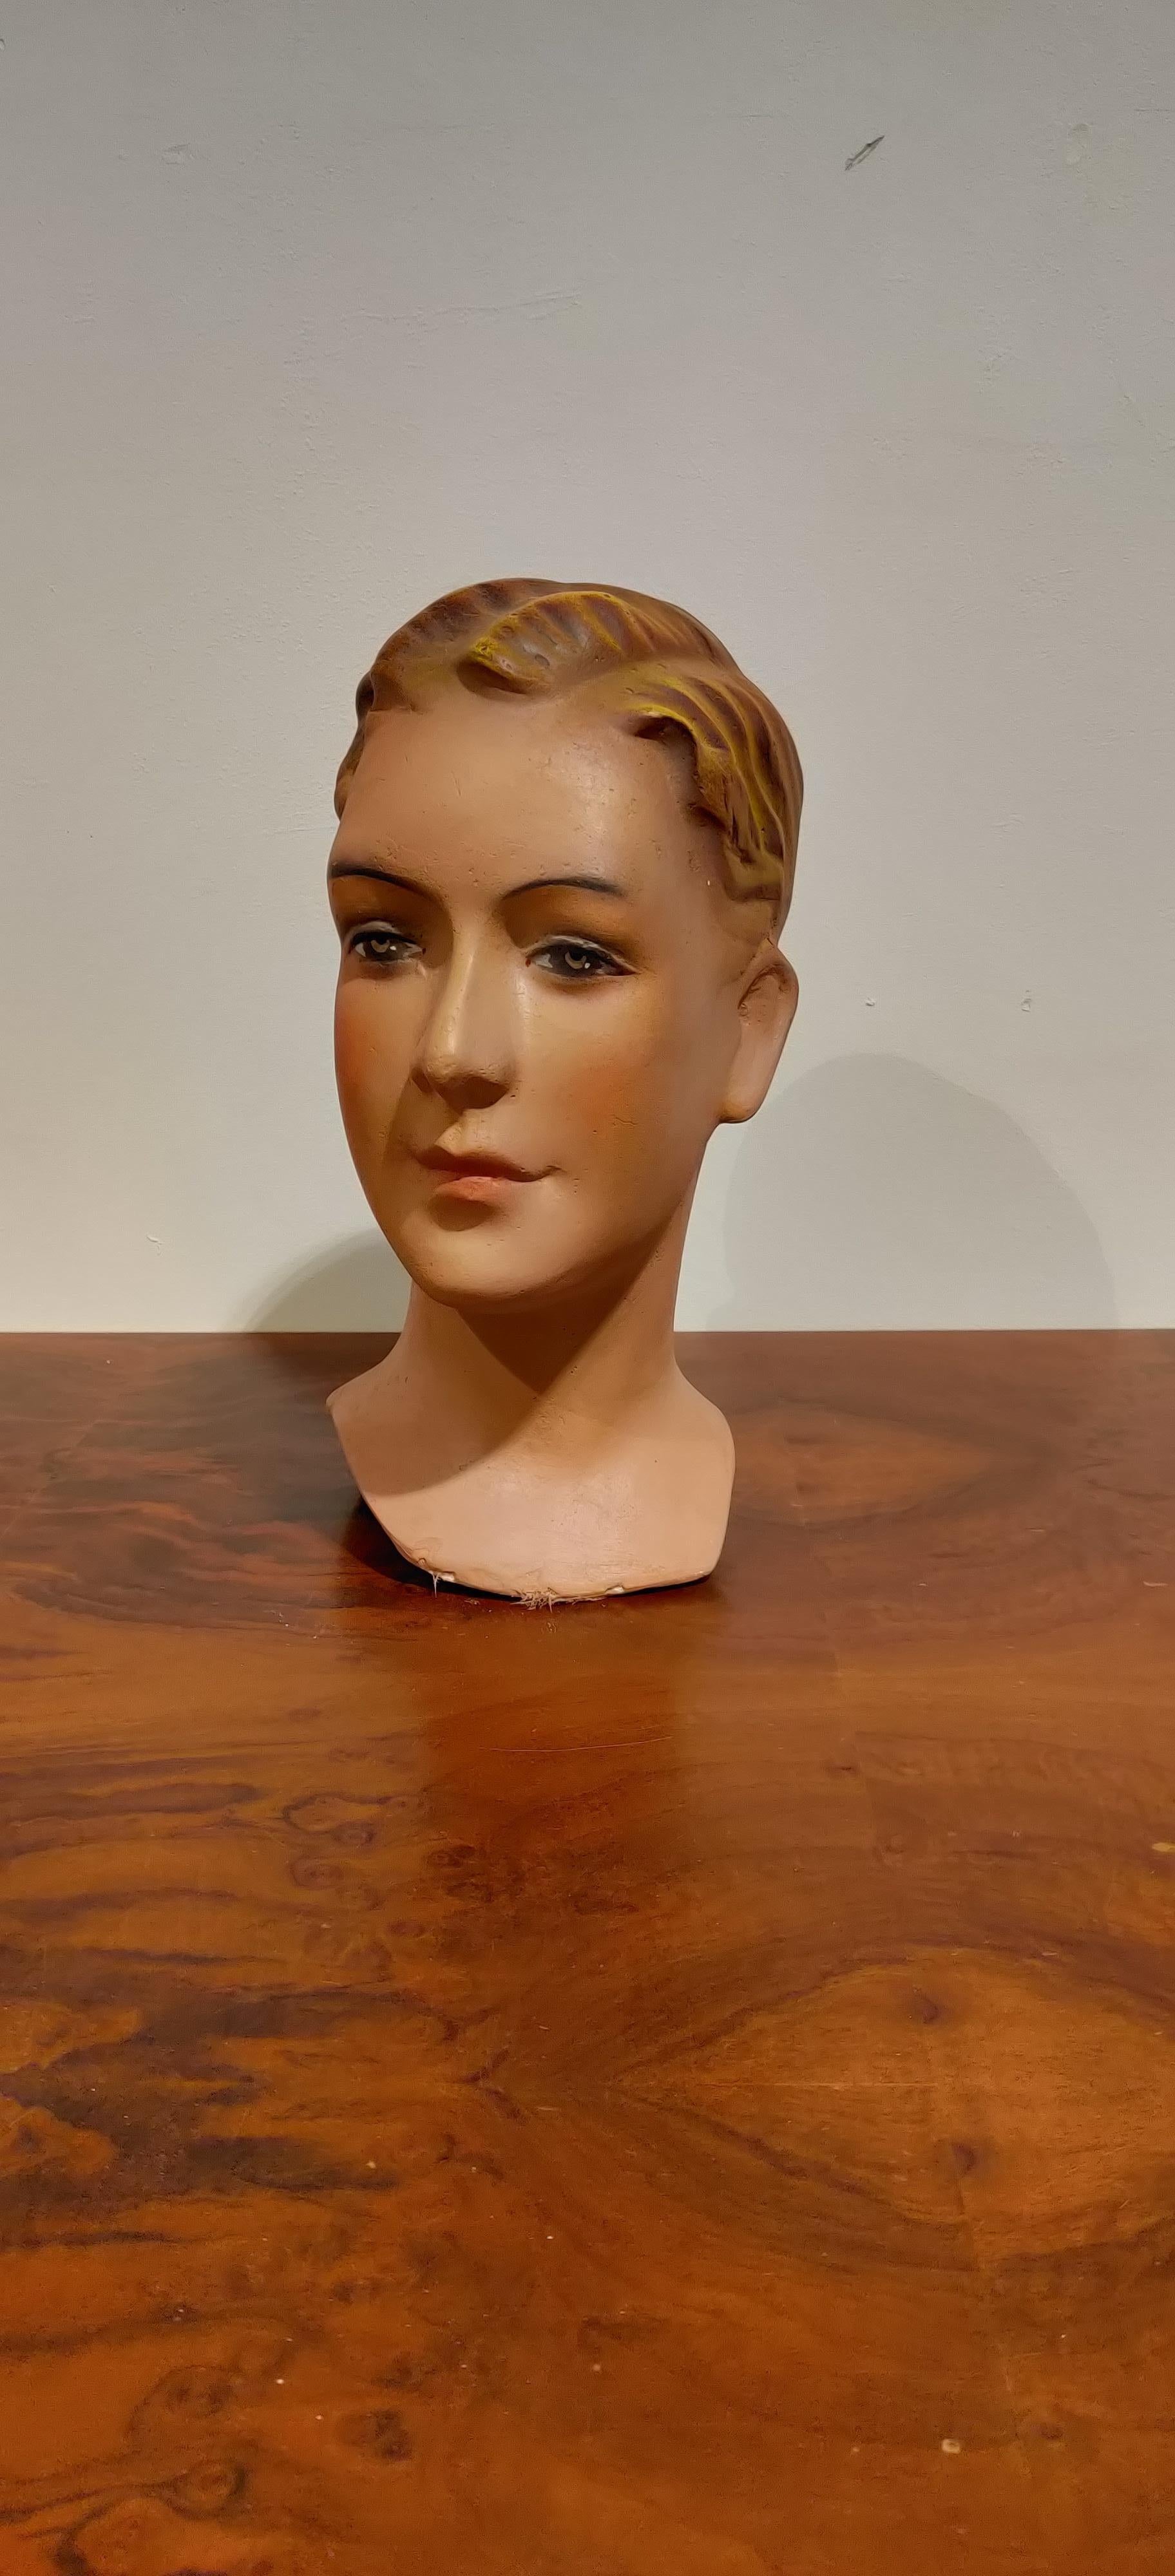 Beautiful male mannequin head made from plaster. 

It has some minor user traces.

Comes from a lot acquired from a clothes shop that stopped activities.

Great decorative item to display glasses, hats,..

France - 1960s

Measures: Height